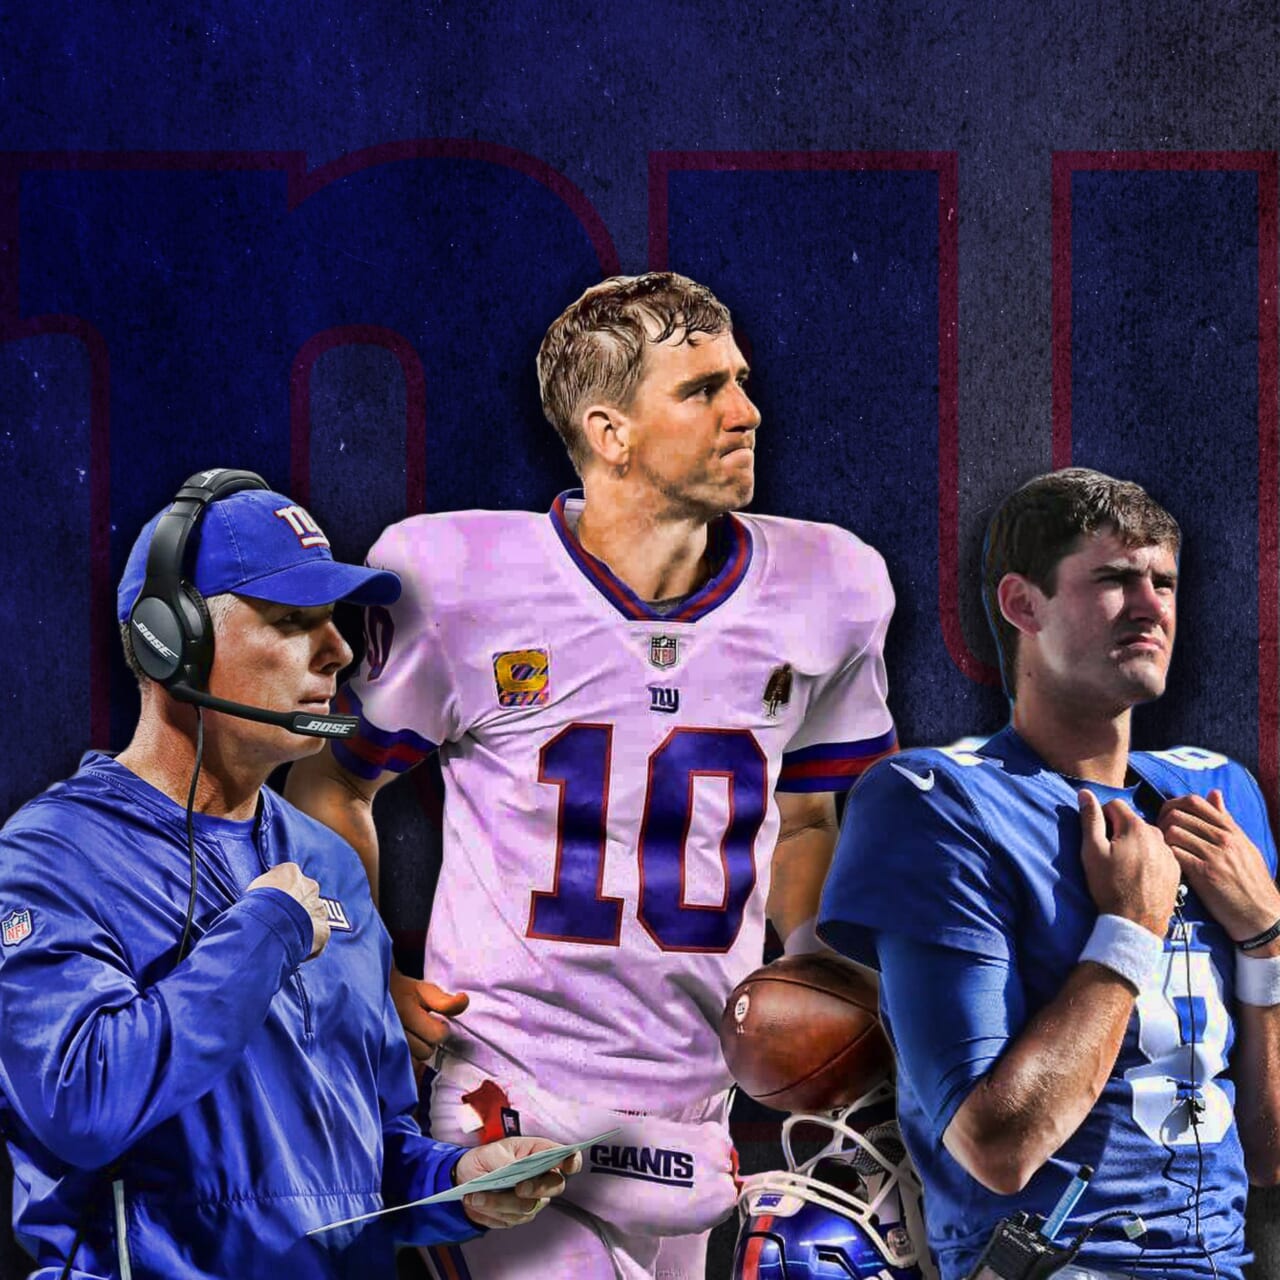 New York Giants: Eli is the MANning